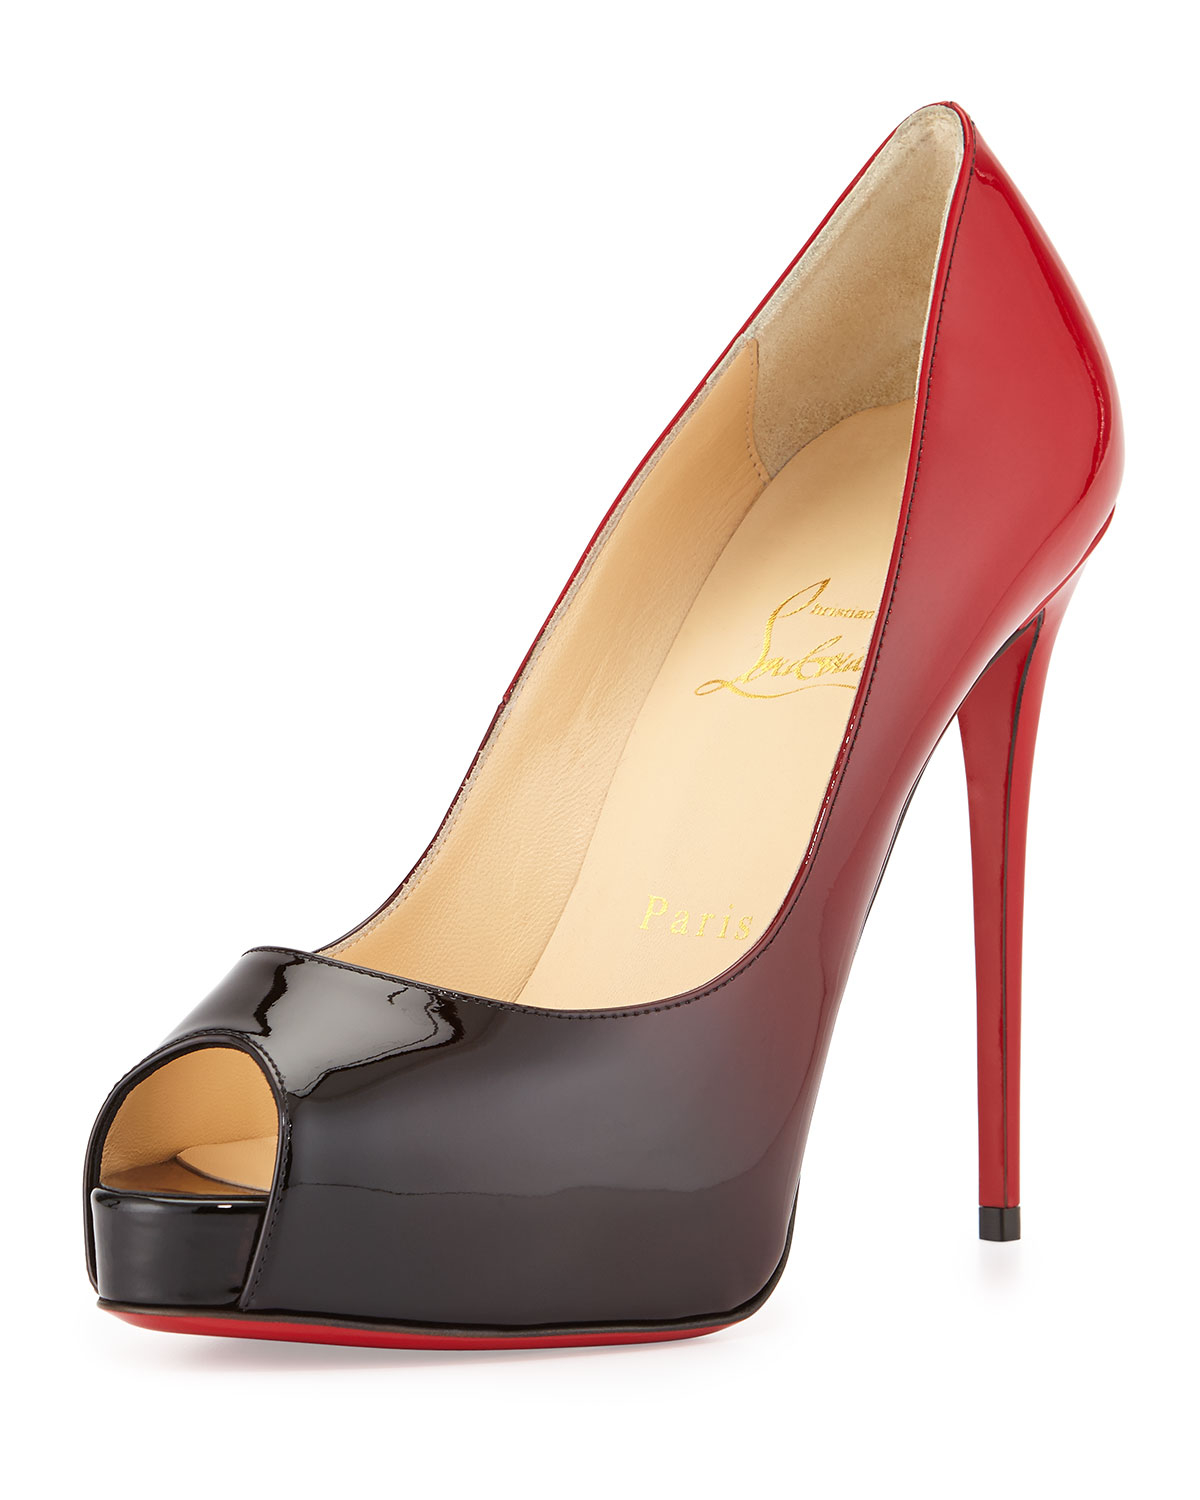 Christian Louboutin New Very Prive Ombre Peep-toe Red Sole Pump in ...